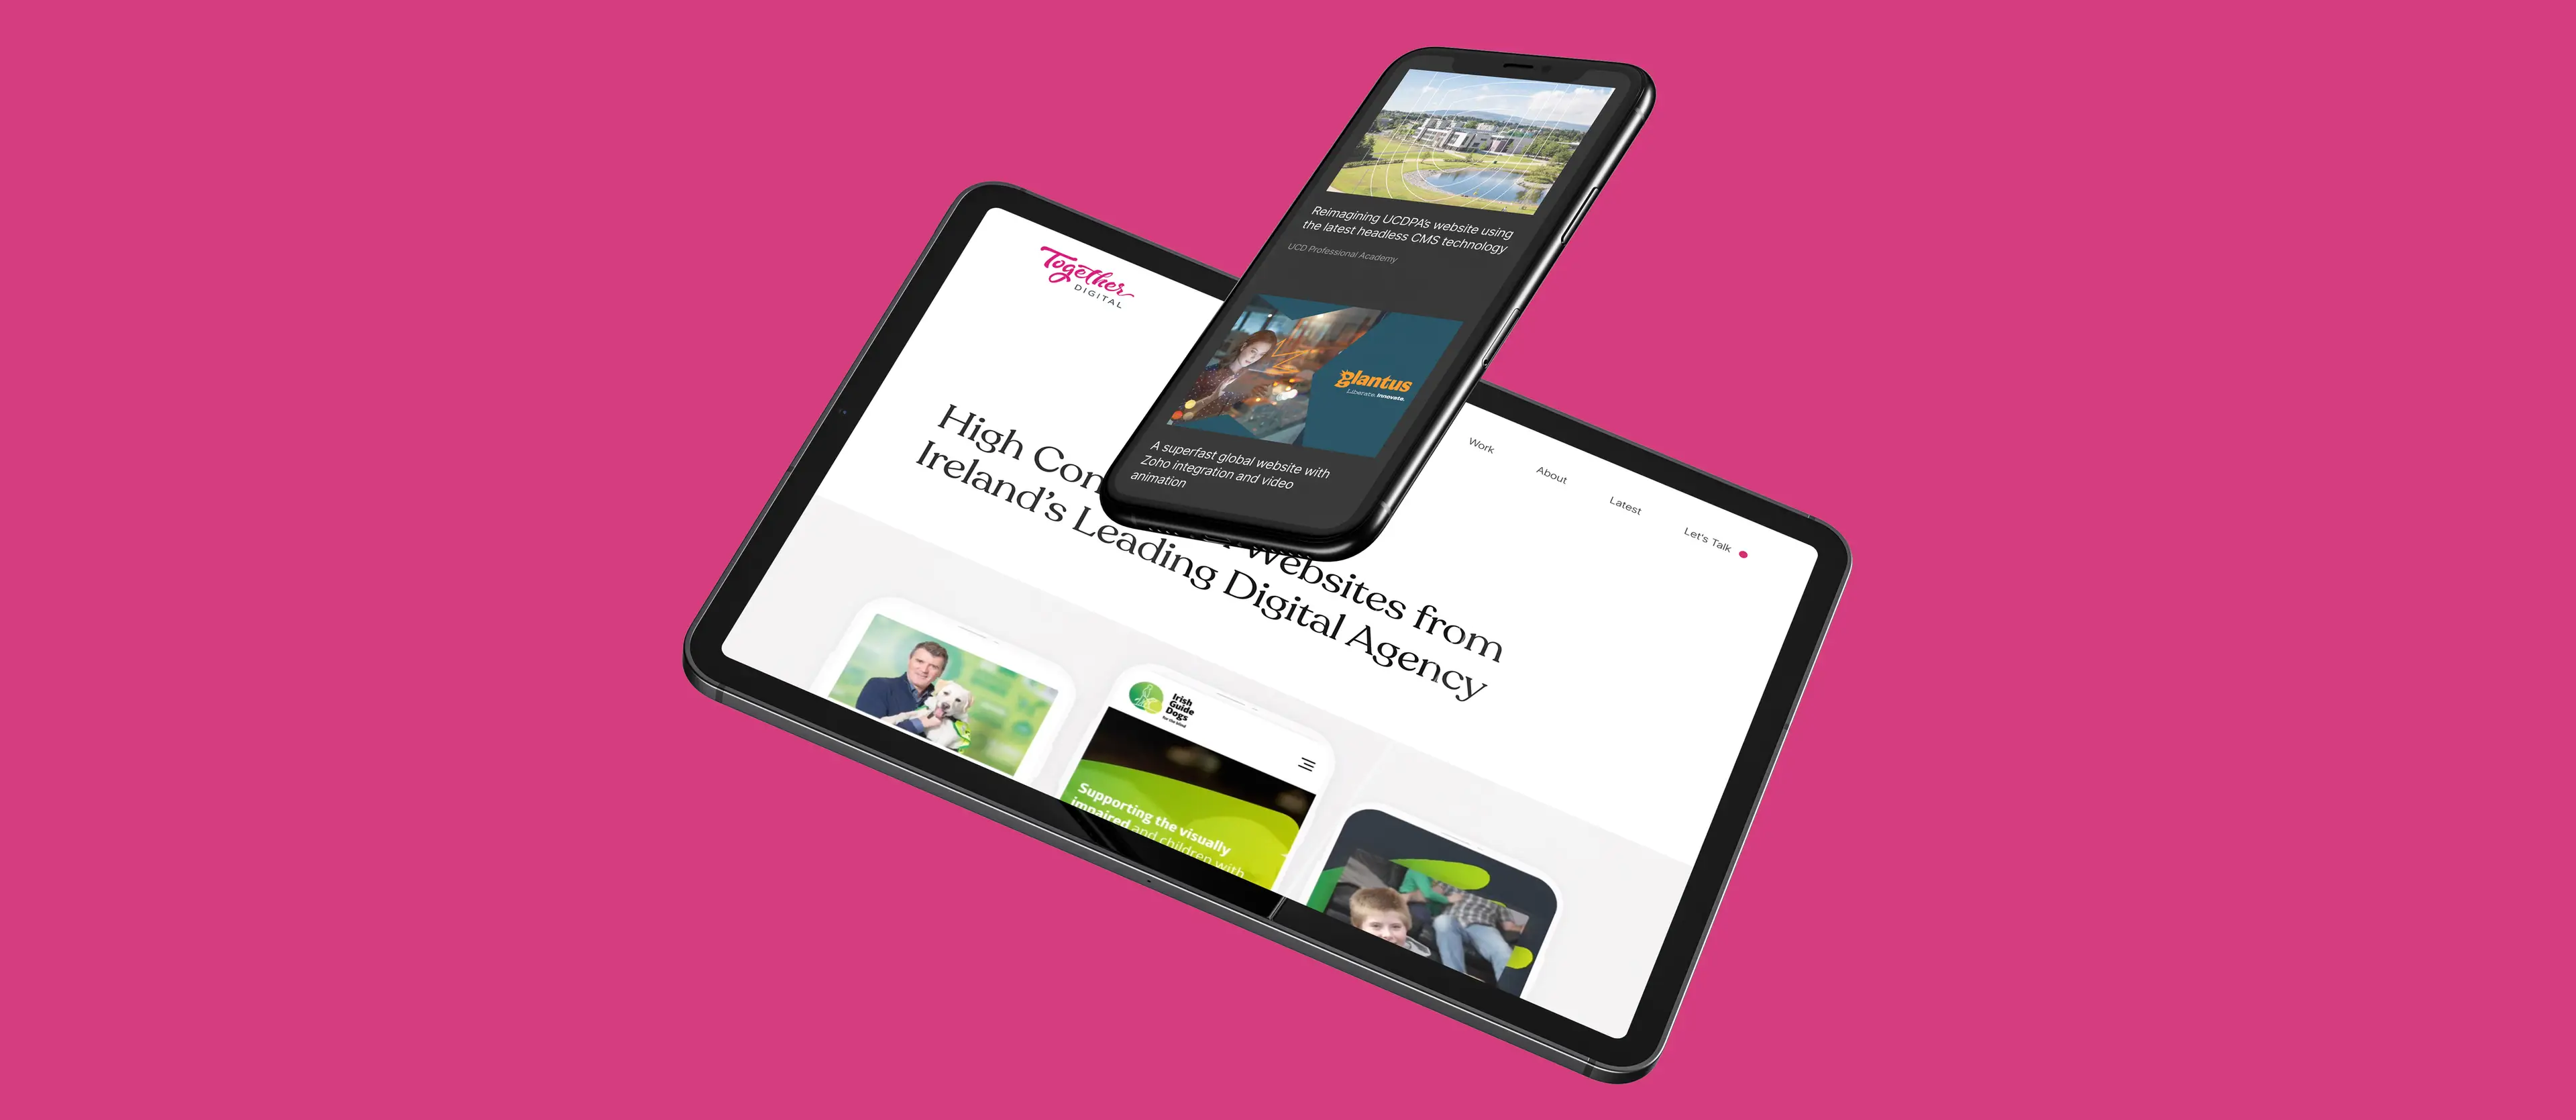 Pink graphic with image of mobile devices showing imagery from Together Digital's new website 